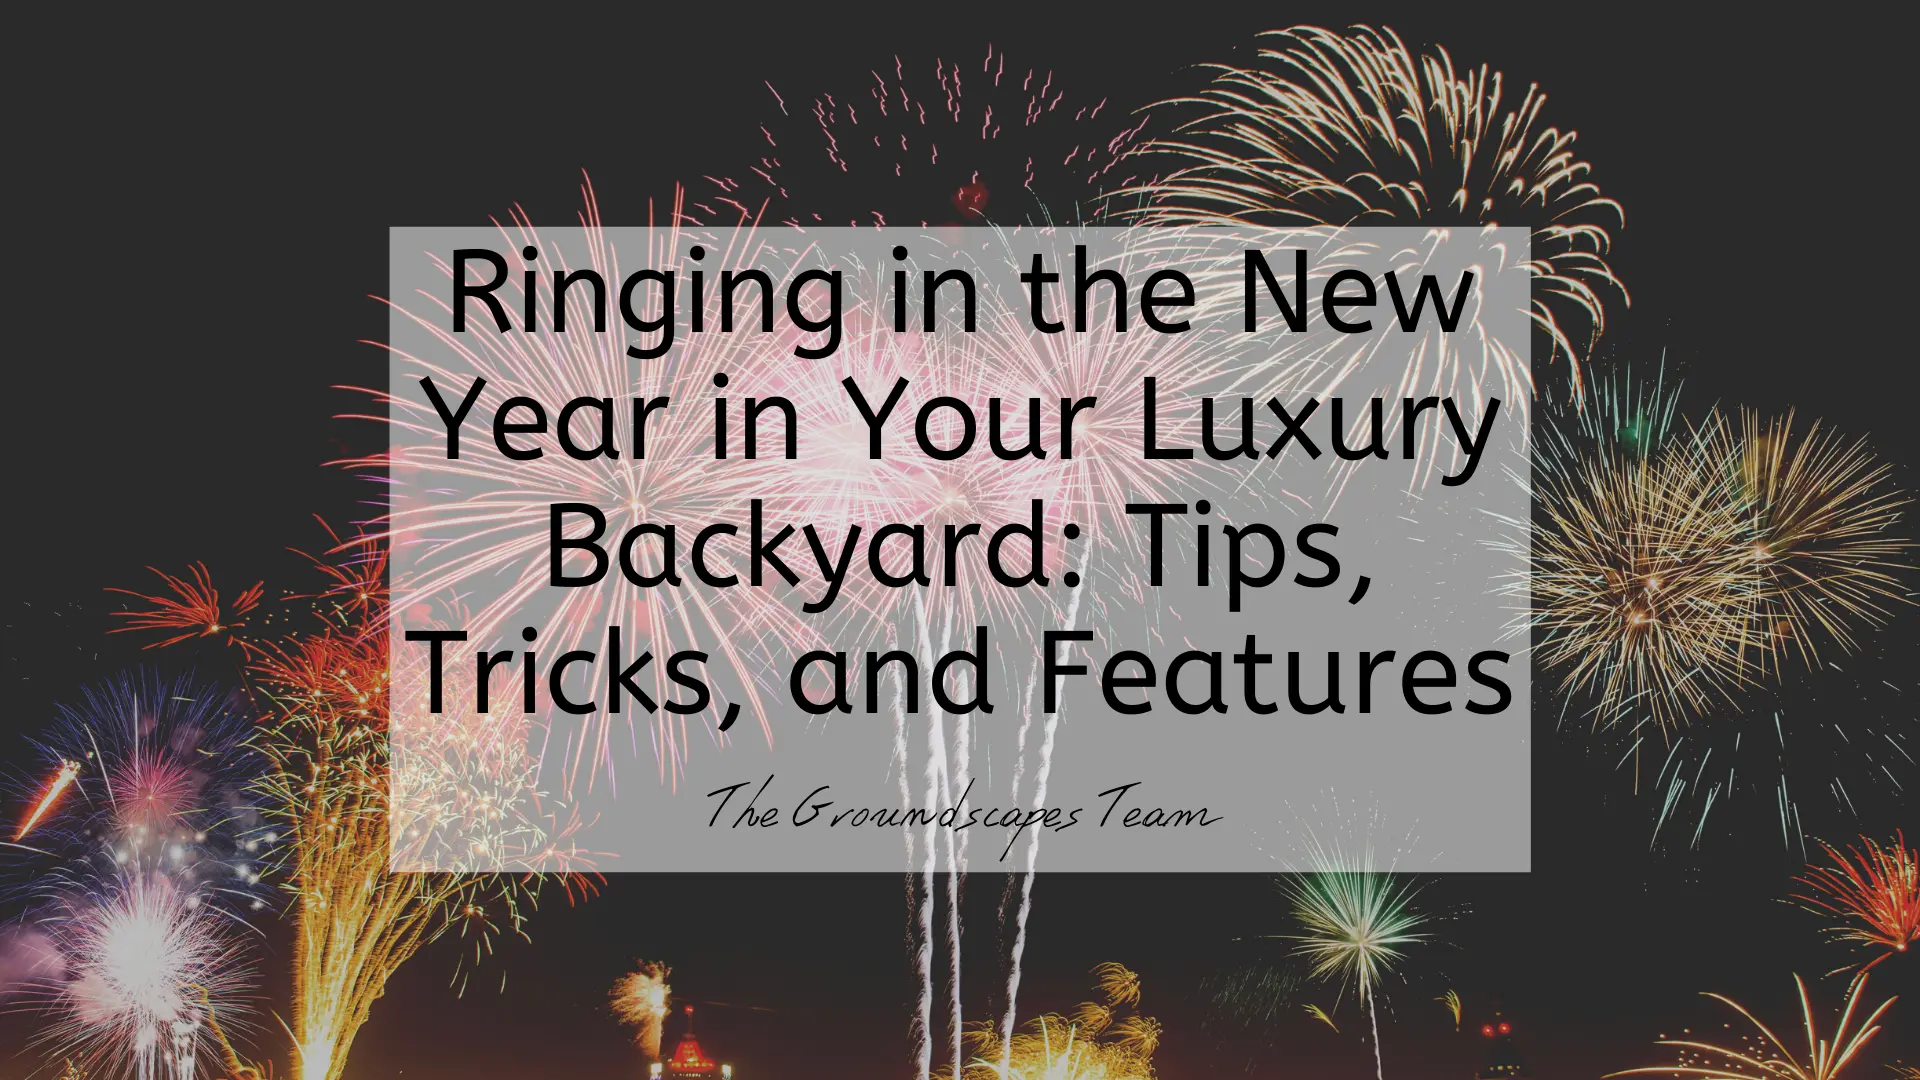 Ringing in the New Year in Your Luxury Backyard: Tips, Tricks, and Features